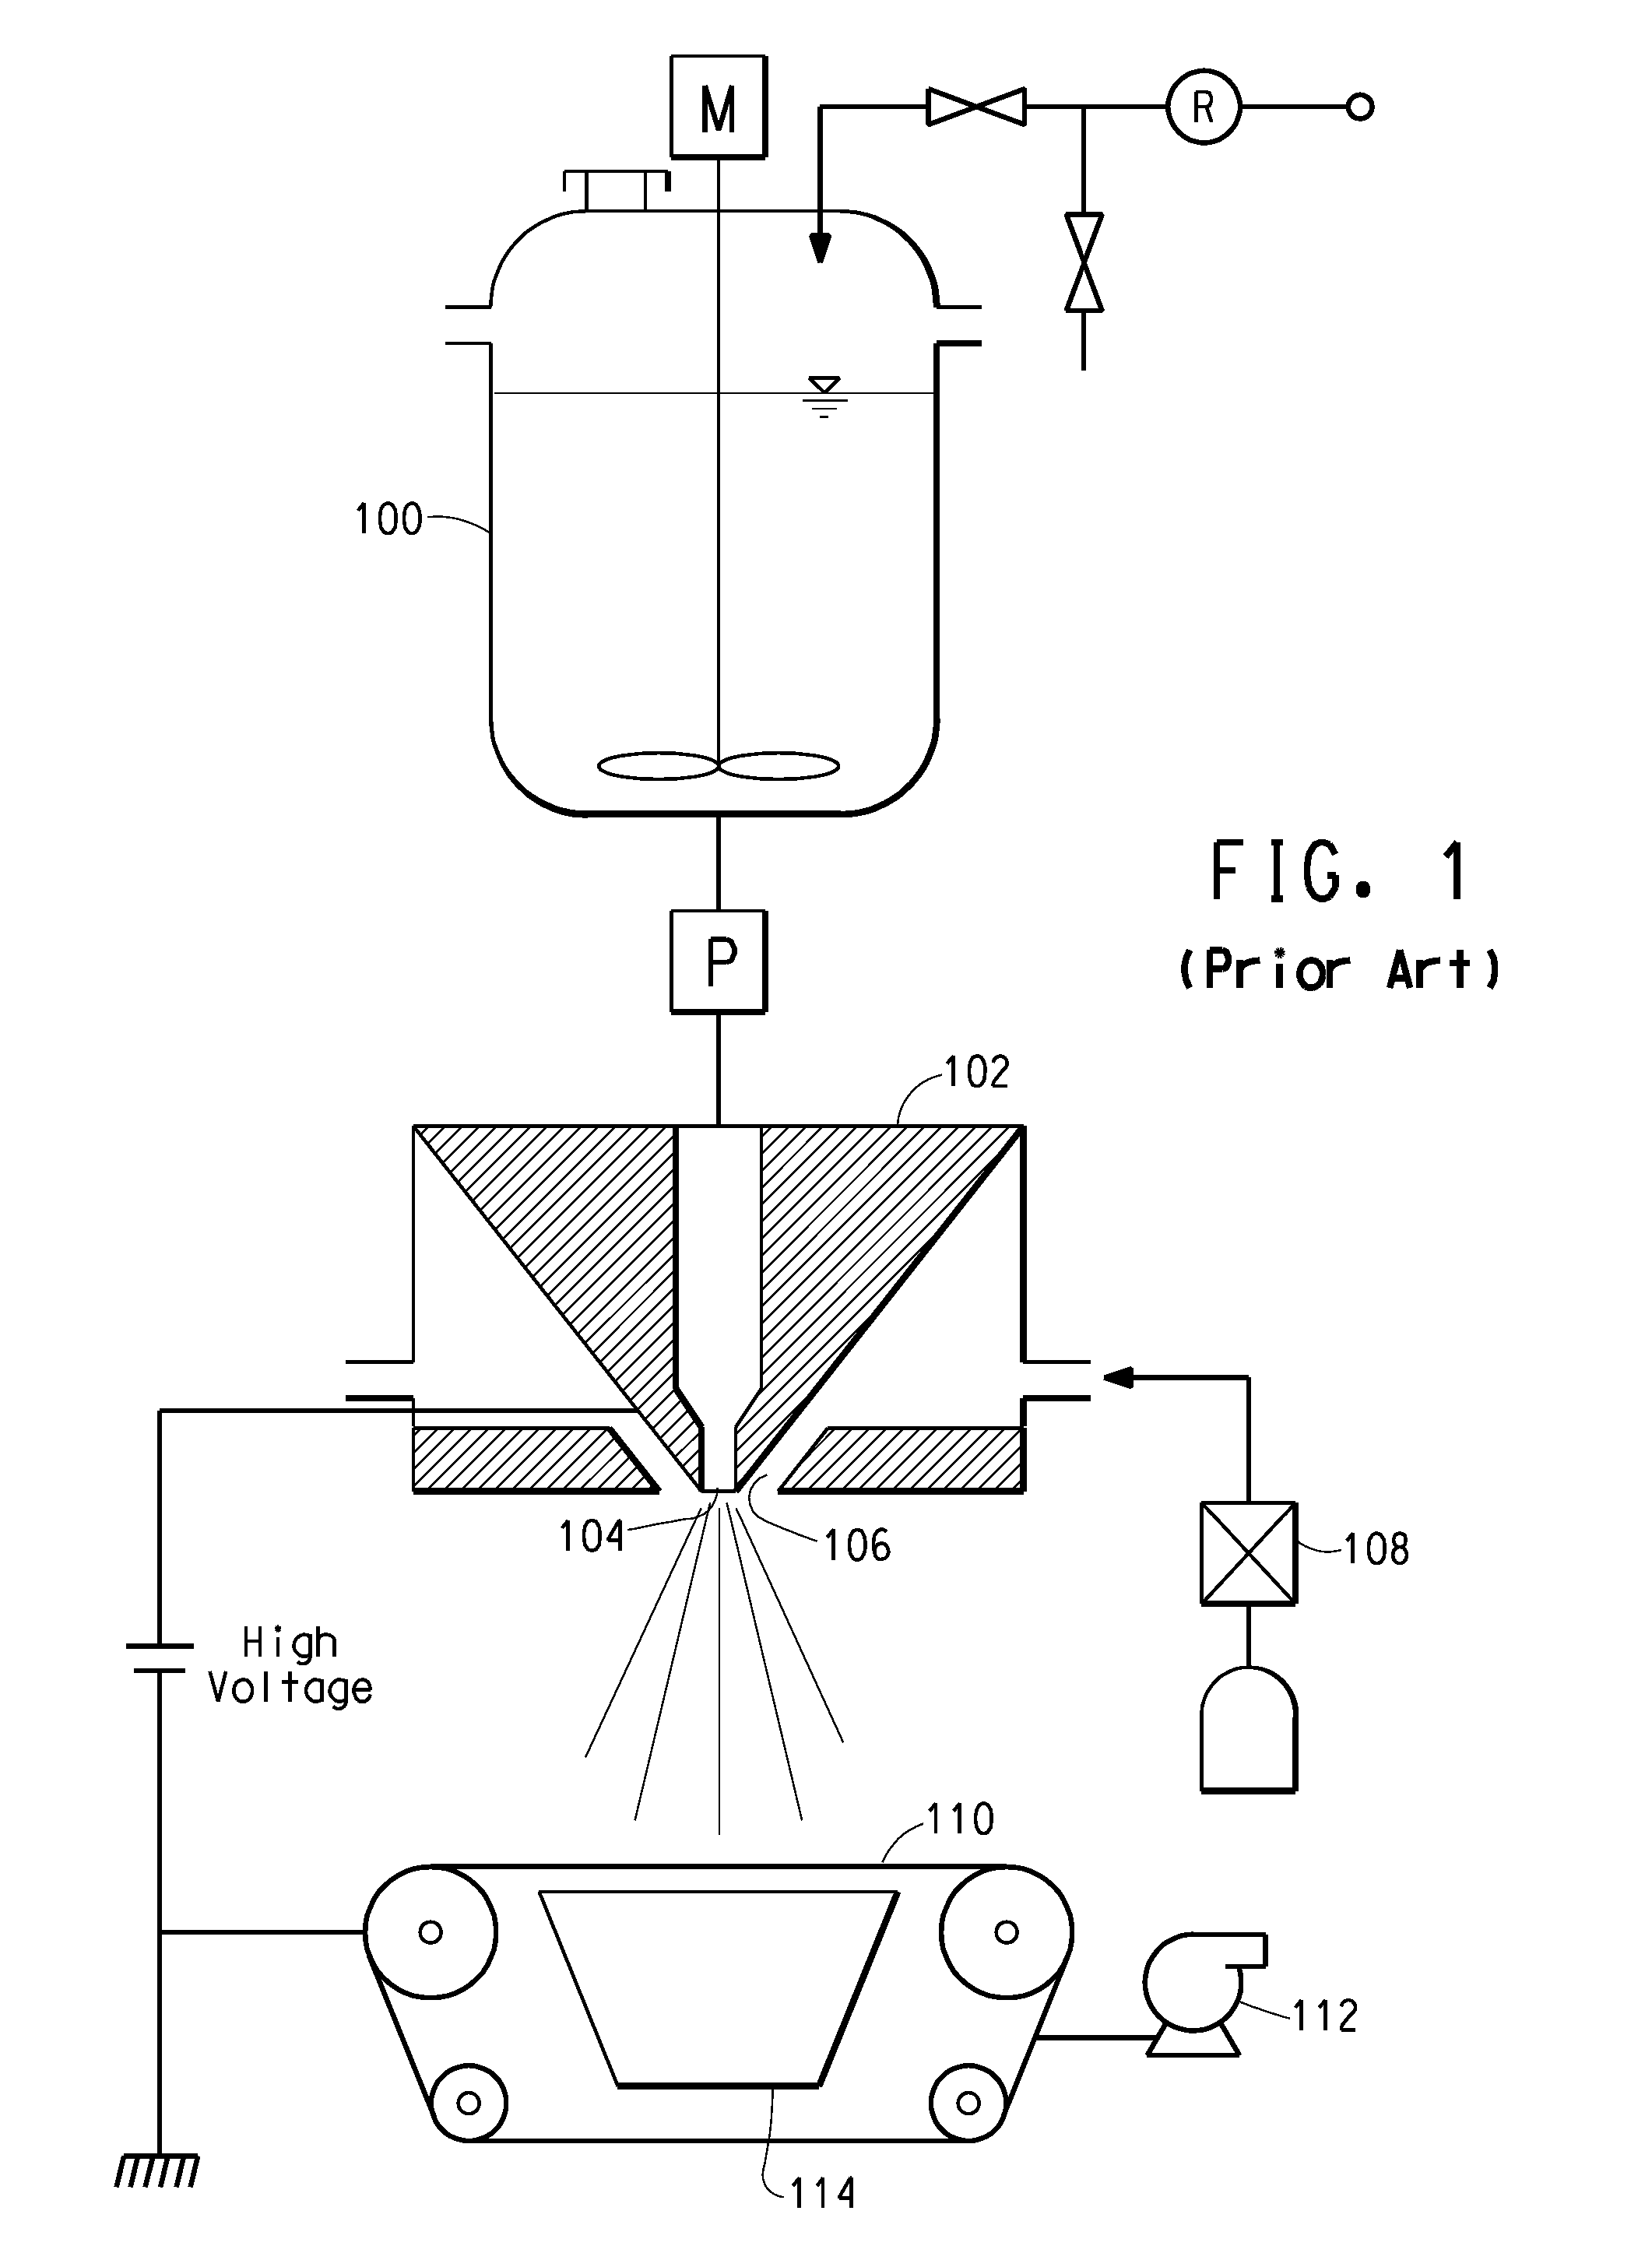 Fiber spinning process using a weakly interacting polymer